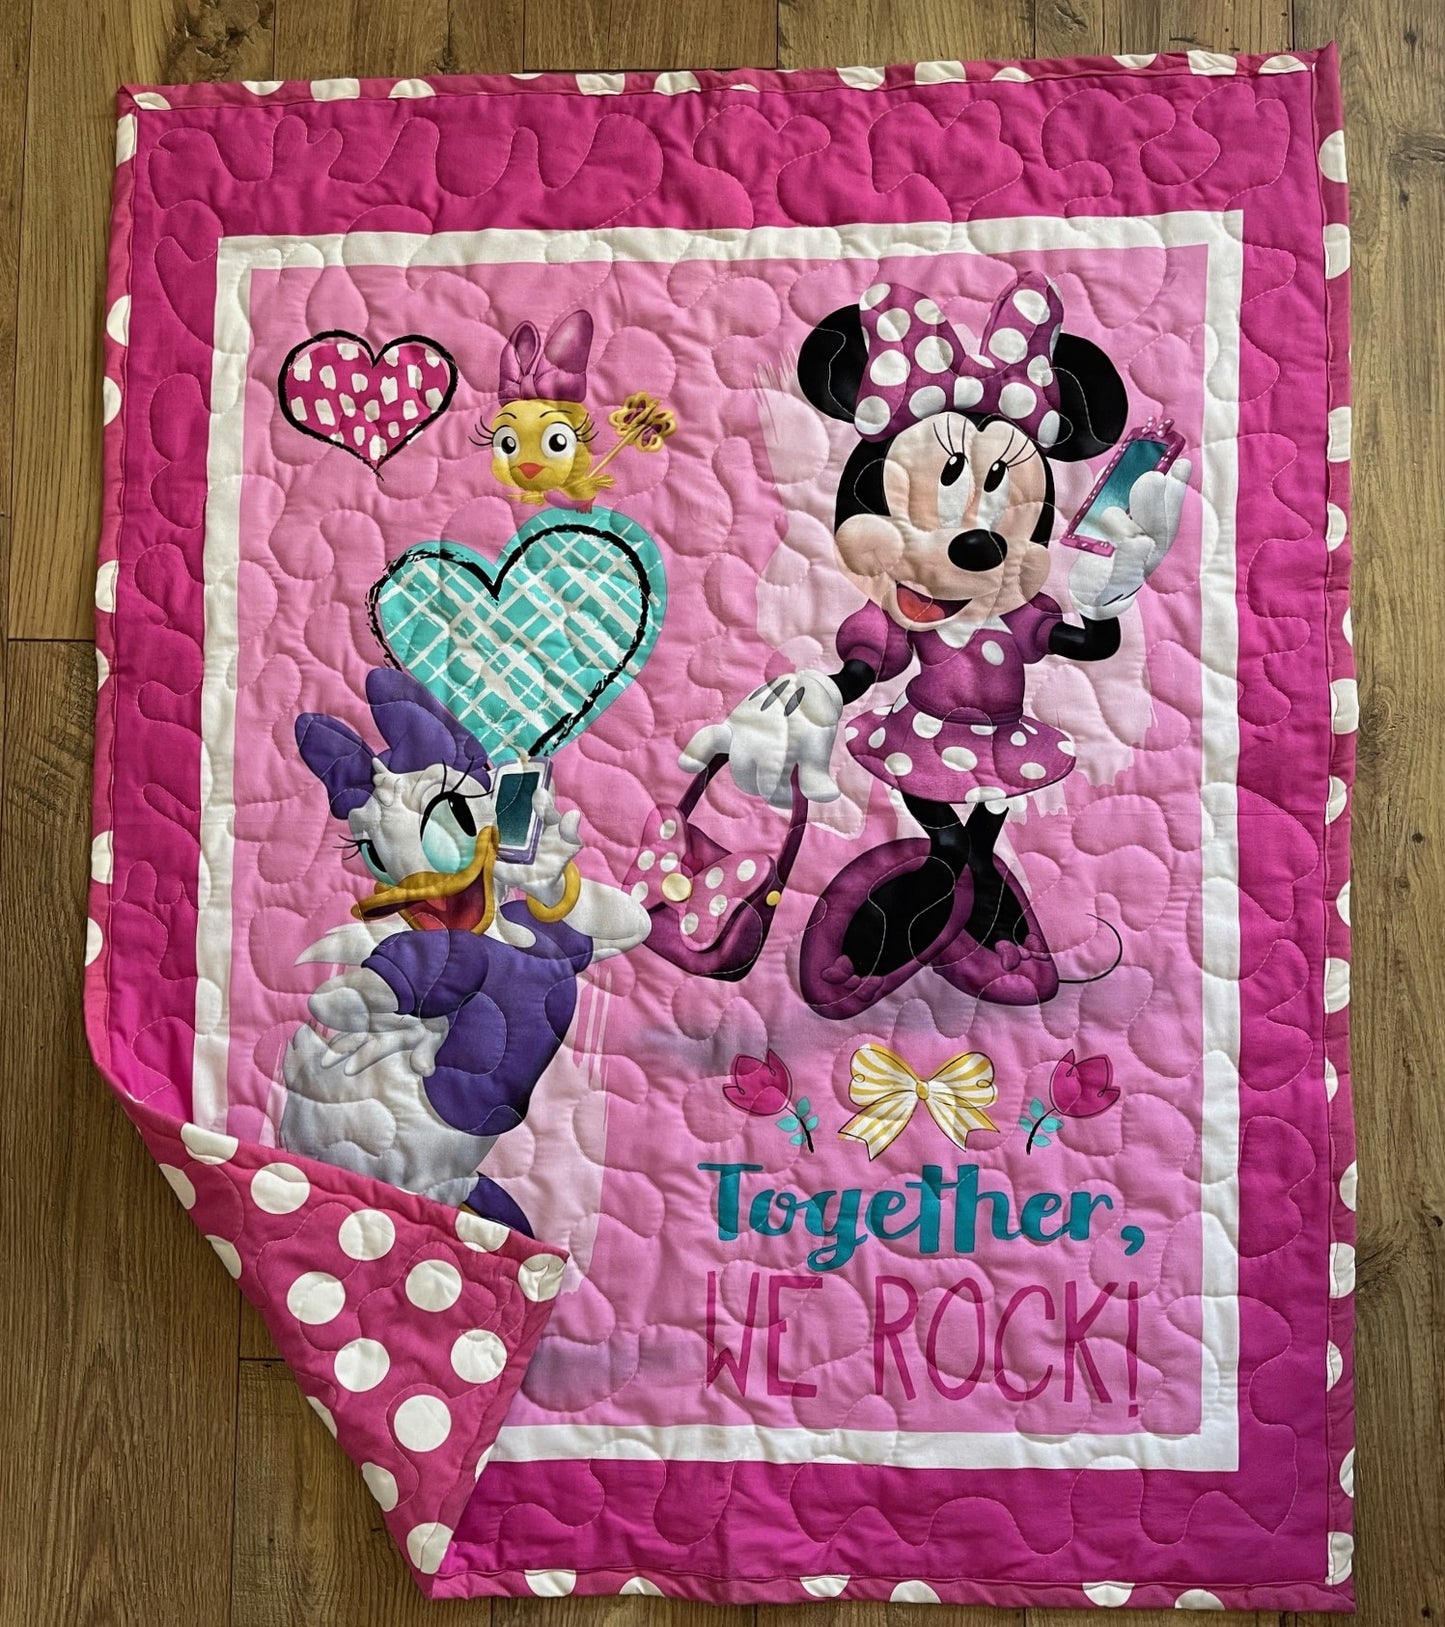 MINNIE MOUSE & DAISY DUCK "TOGETHER WE ROCK" Inspired Quilted Blanket